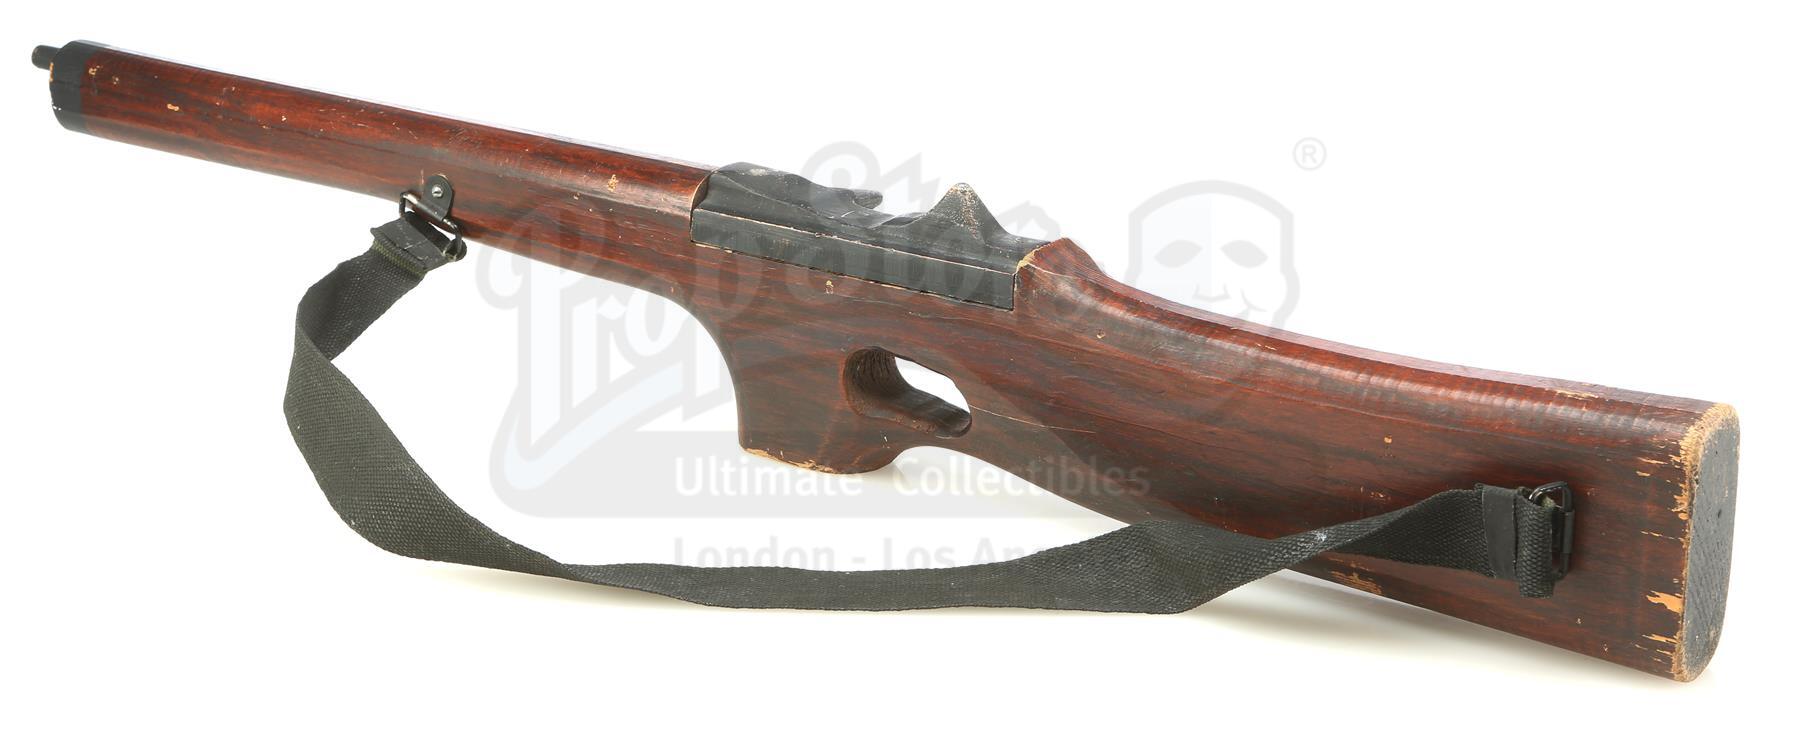 Lot #526 - PLANET OF THE APES (1968) - Ape Rifle - Image 3 of 3